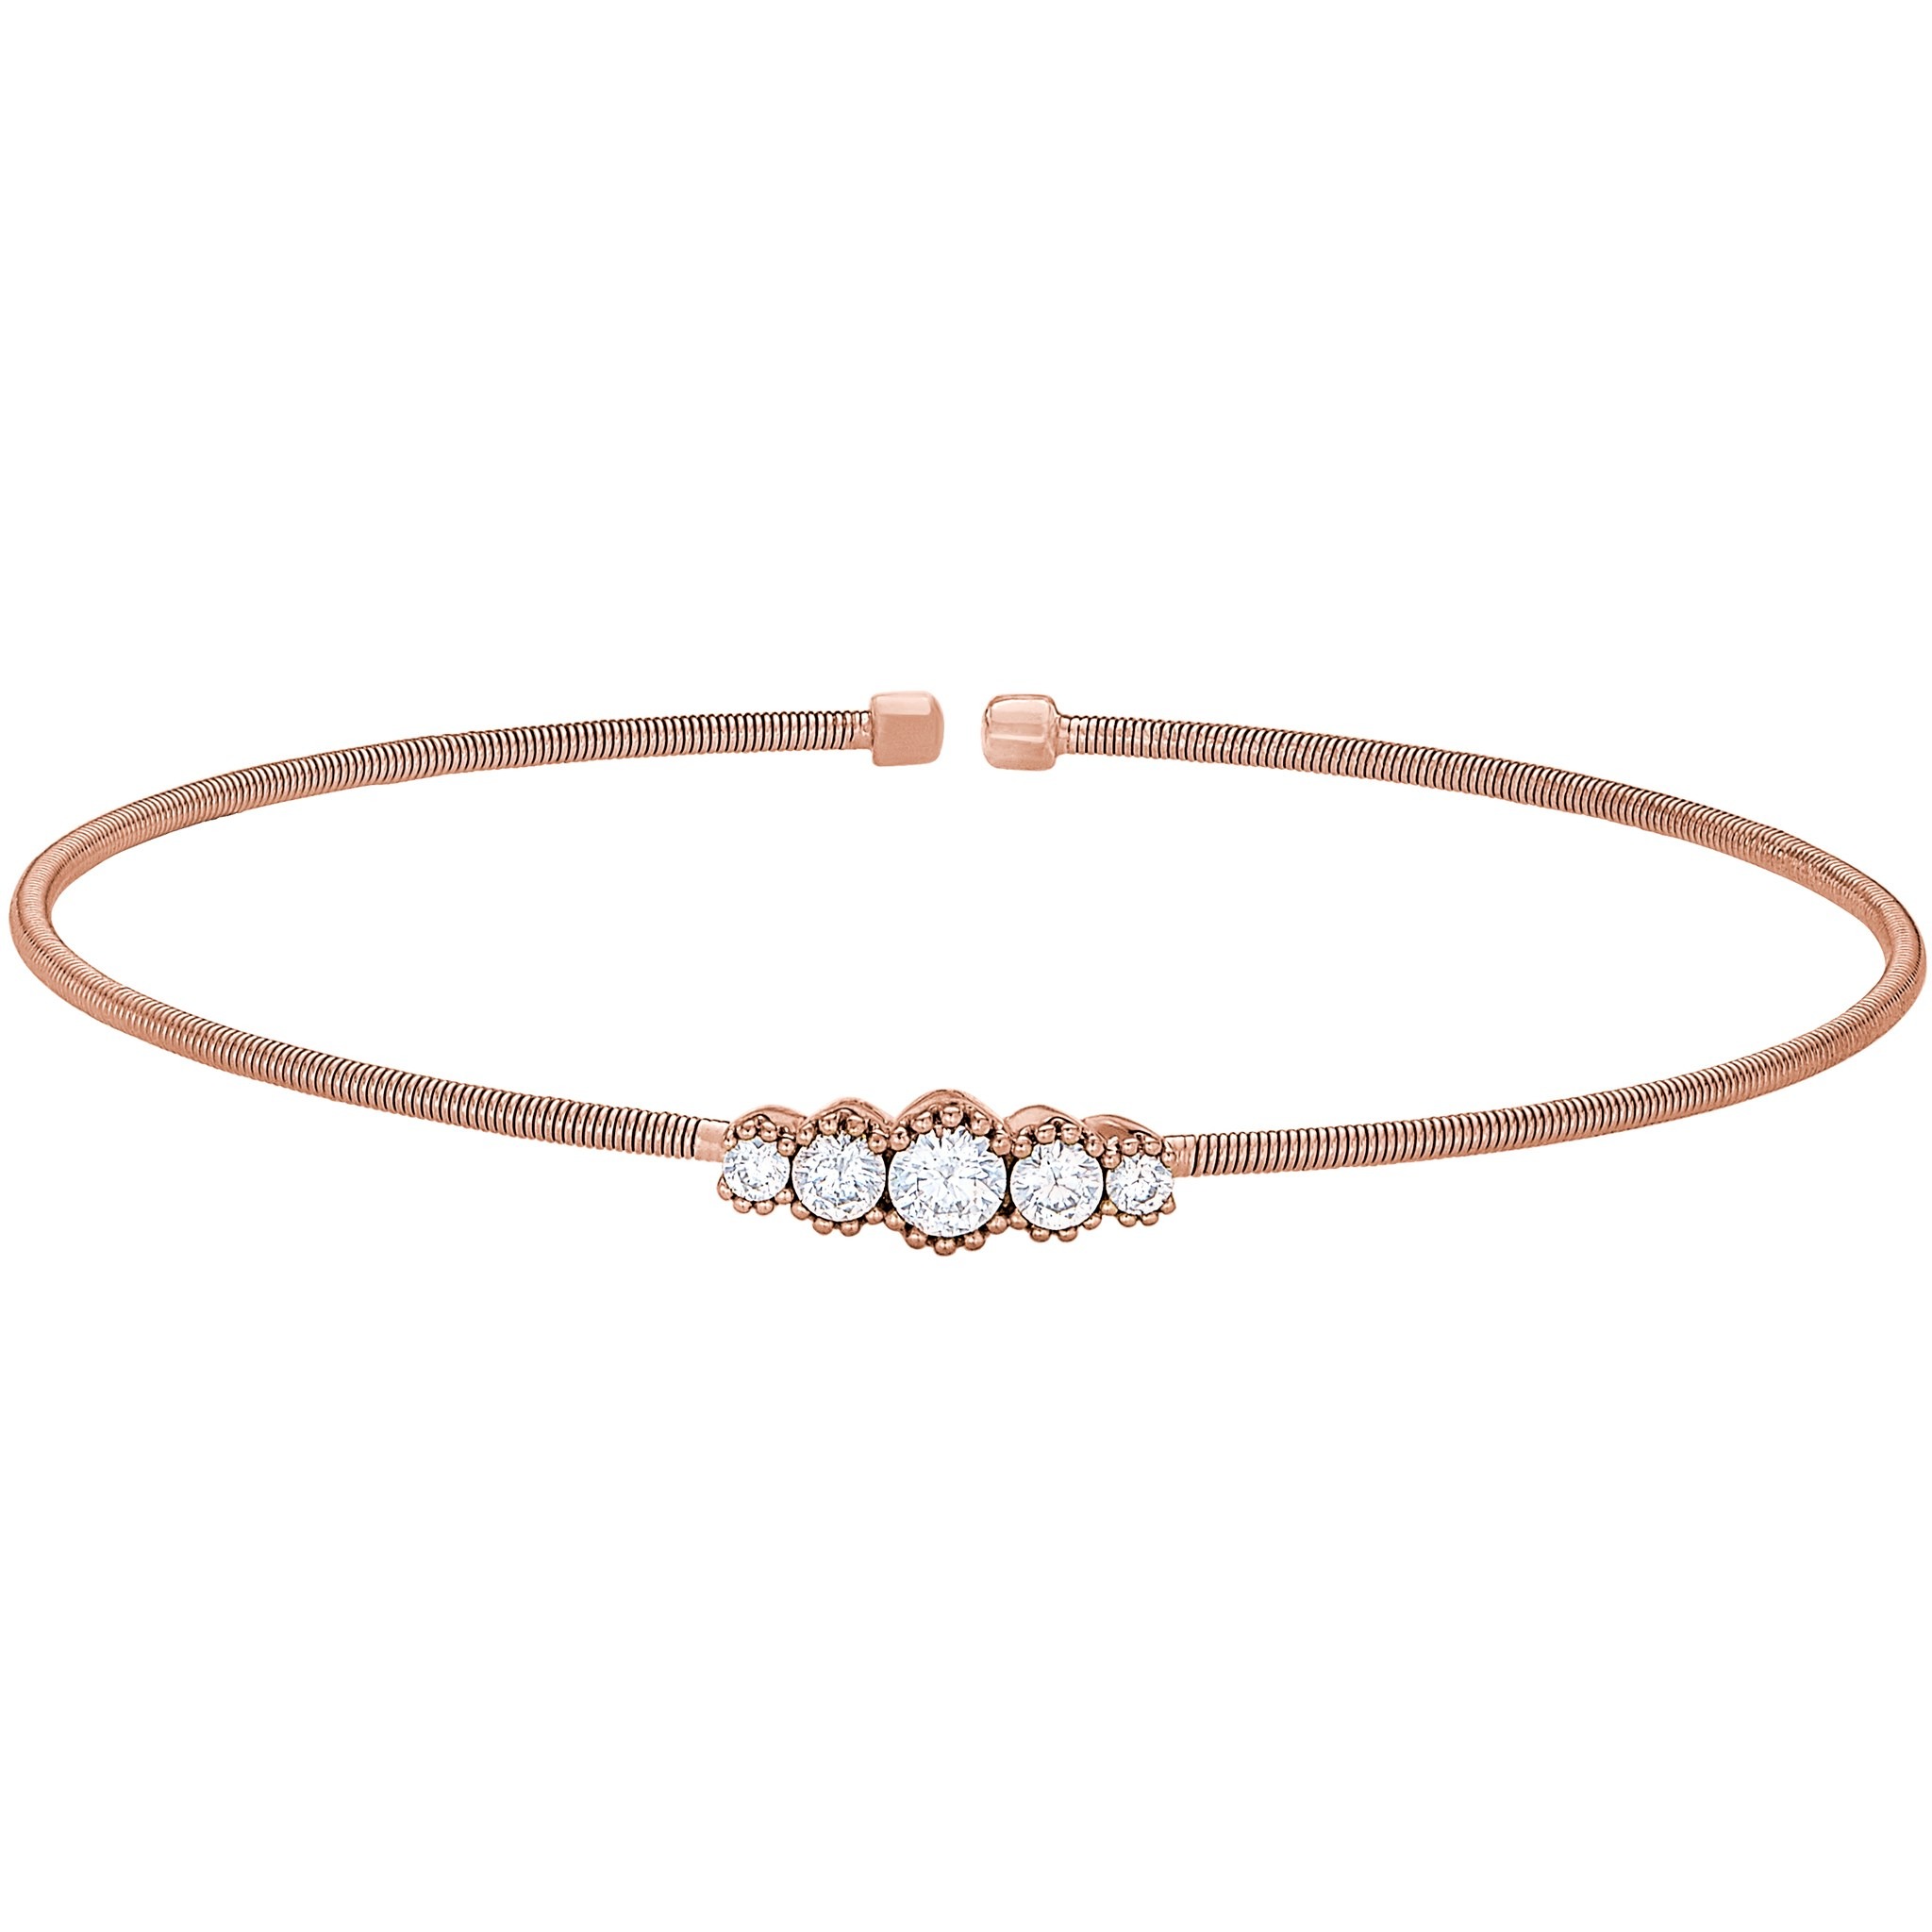 Rose Gold Finish Sterling Silver Cable Cuff Bracelet with Graduated Five Stone Simulated Diamonds